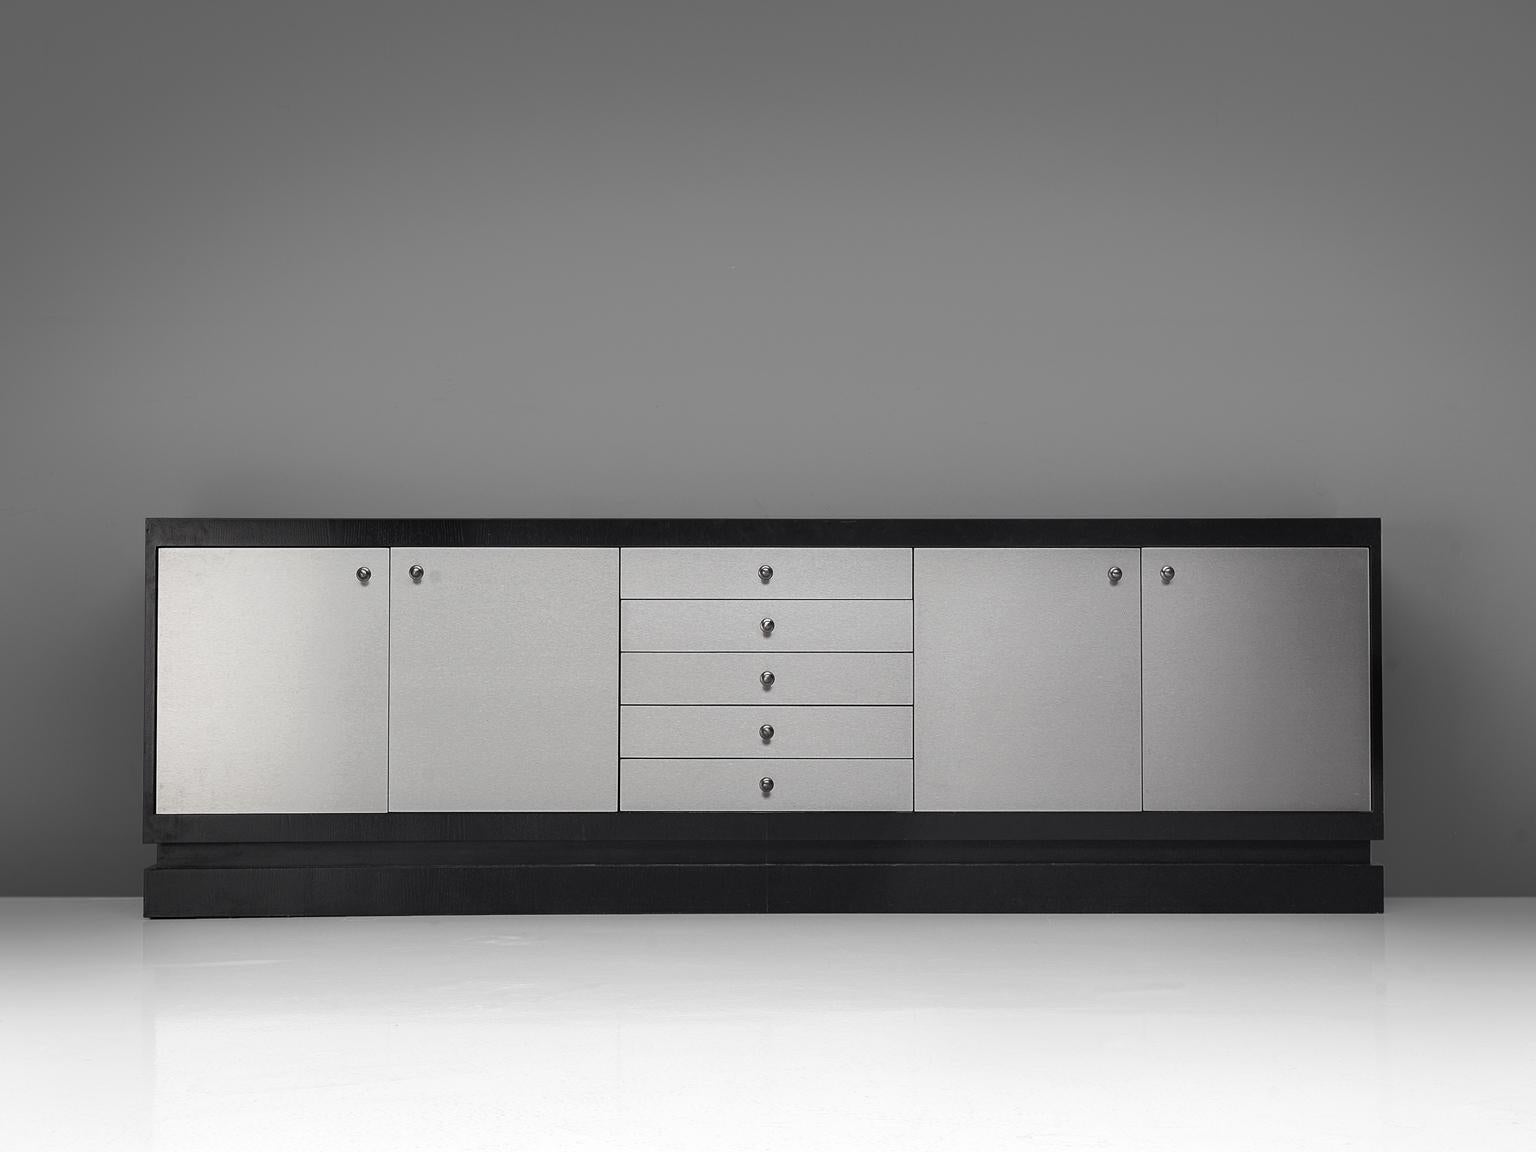 Sideboard, aluminum, wood, Belgium, 1970s.

Very minimal designed Belgian credenza with wonderful aluminum laminated door panels which create a real rich expression. Especially the combination with the black laminated outside which creates a high